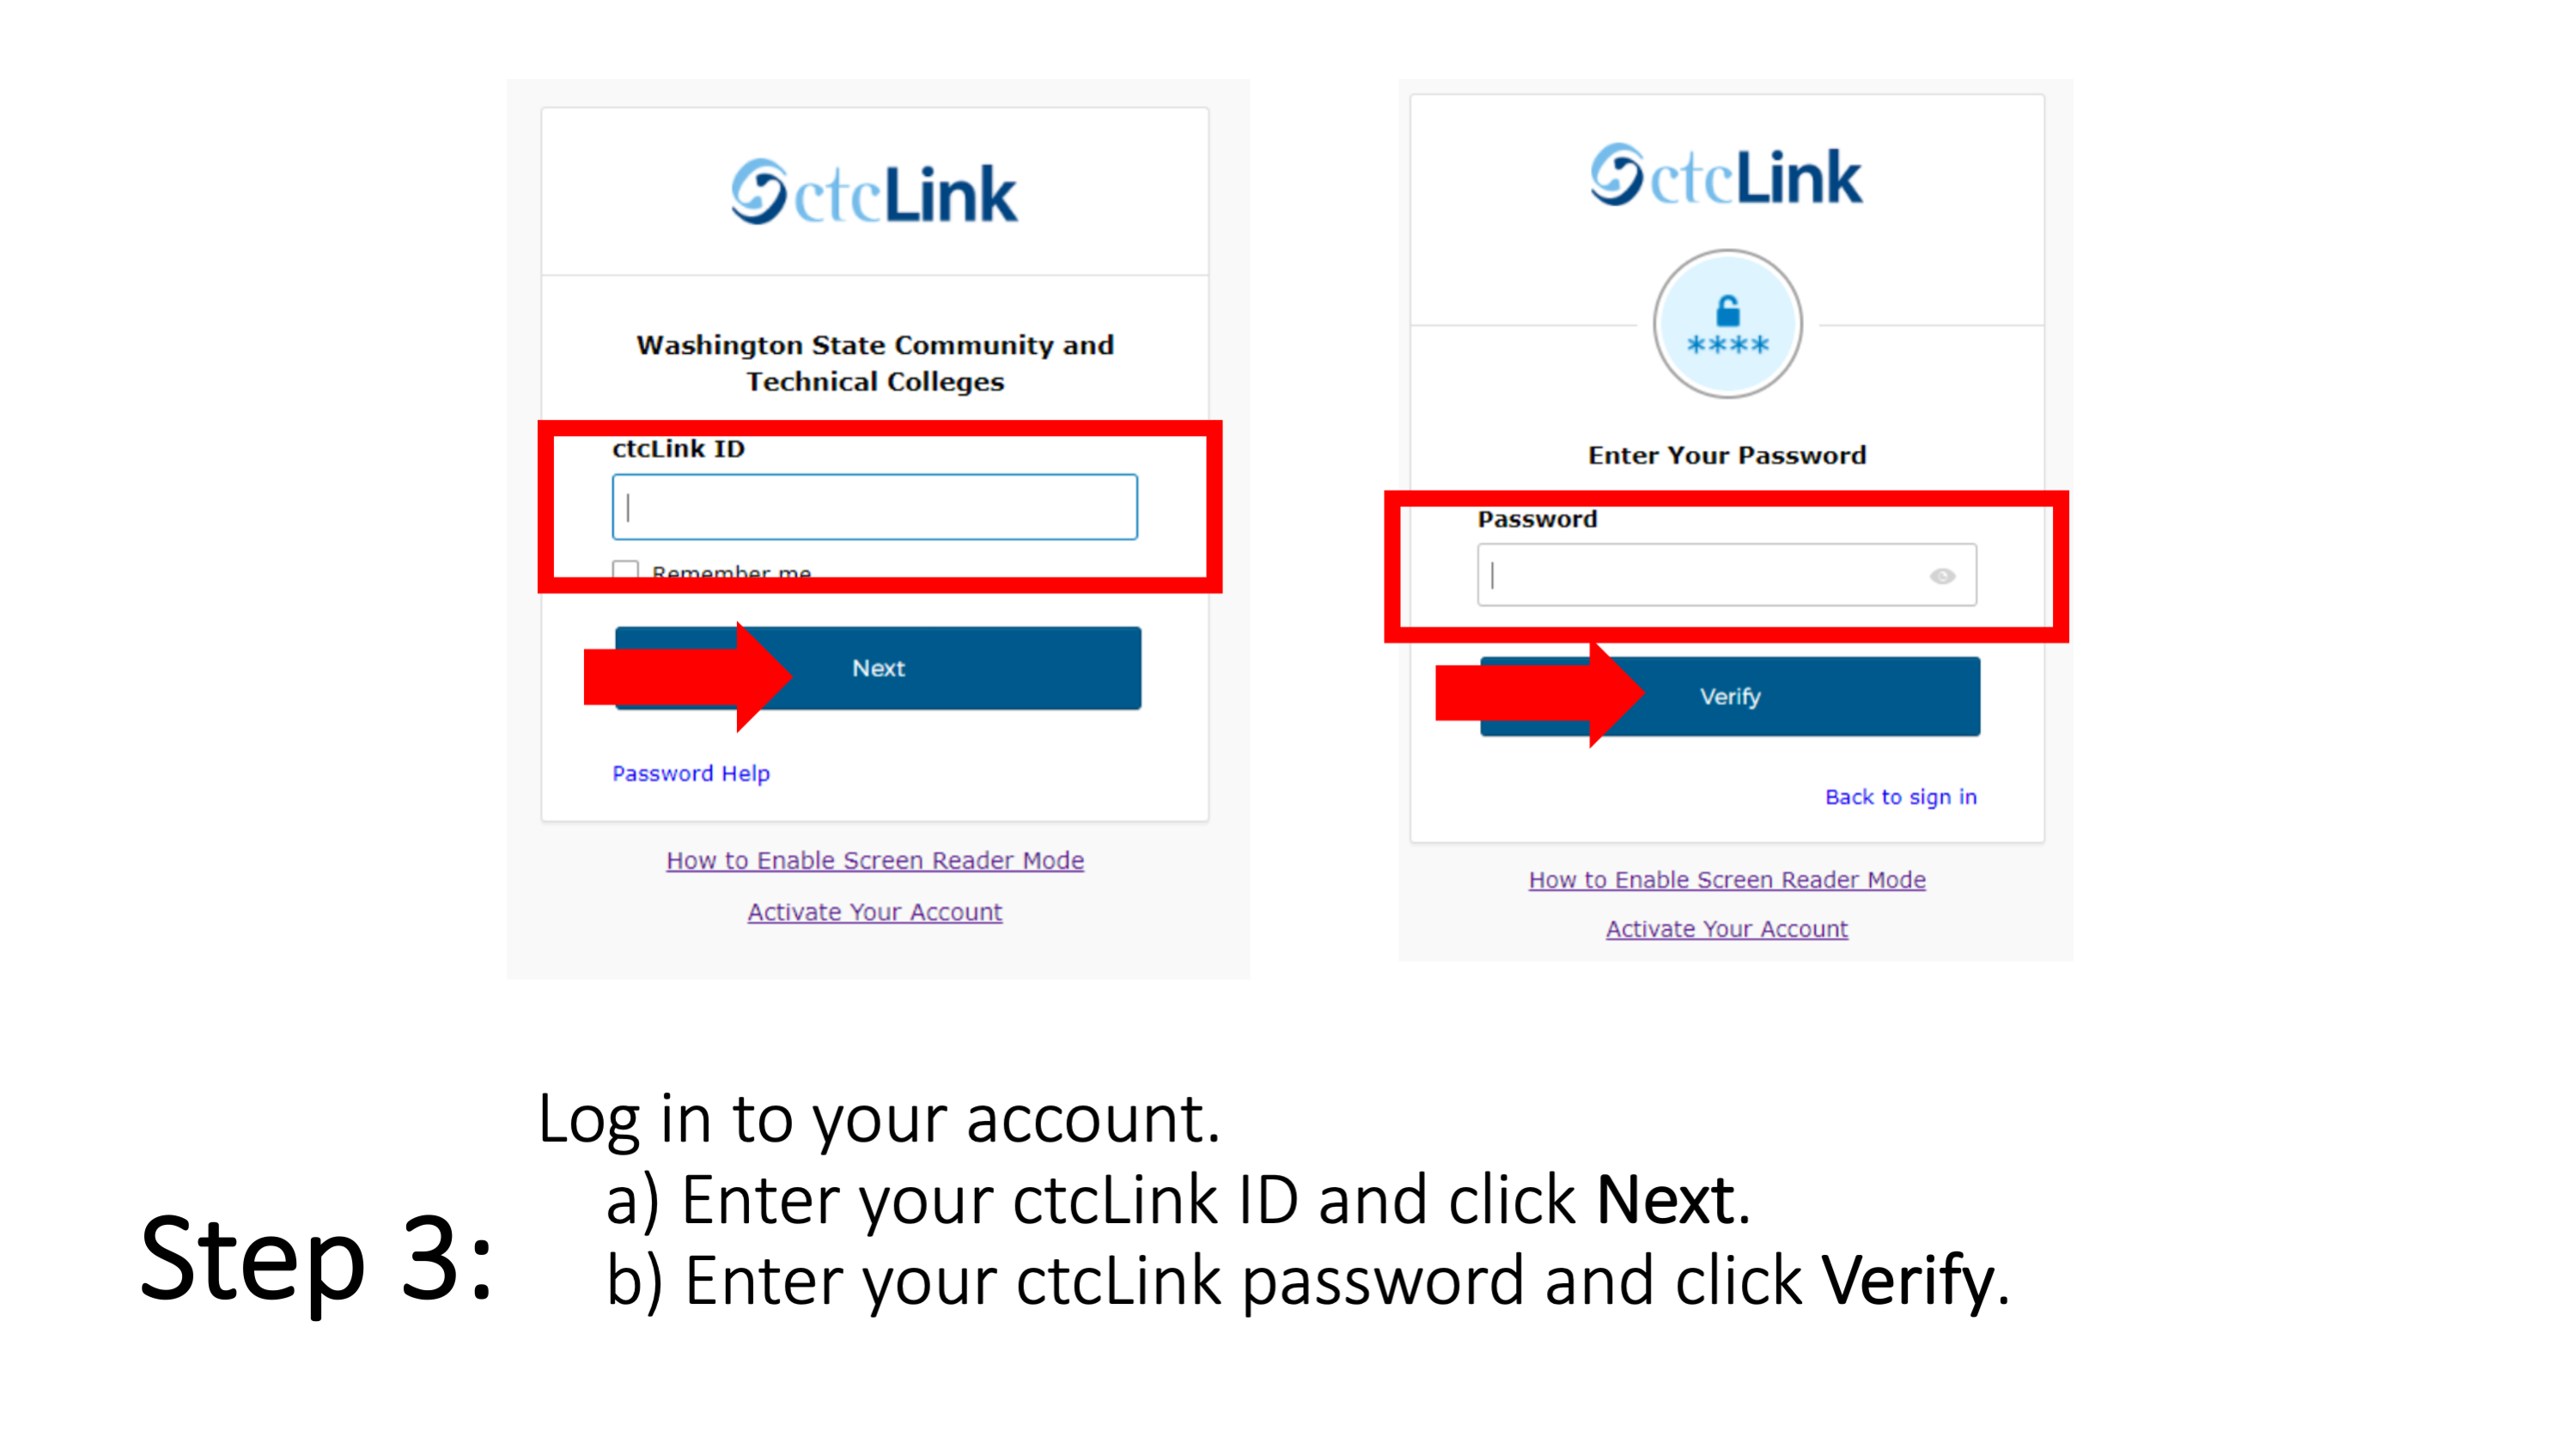 Slide 4 - Step 3: Log in to your account. a) Enter your ctcLink ID and click Next. b) Enter your ctcLink password and click Verify. 